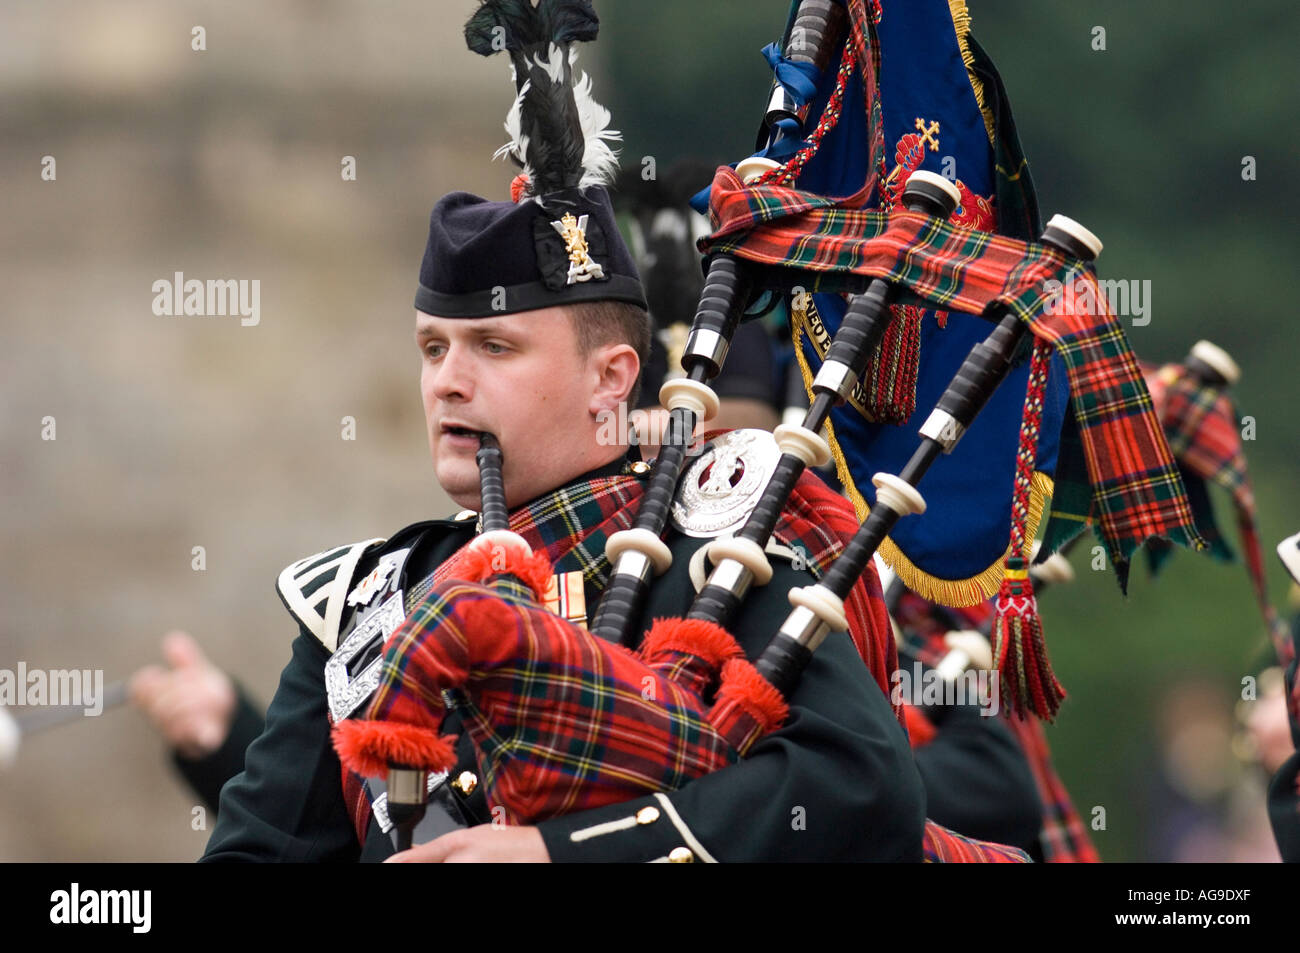 Royal Regiment of Scotland pipes and drums band. Stock Photo